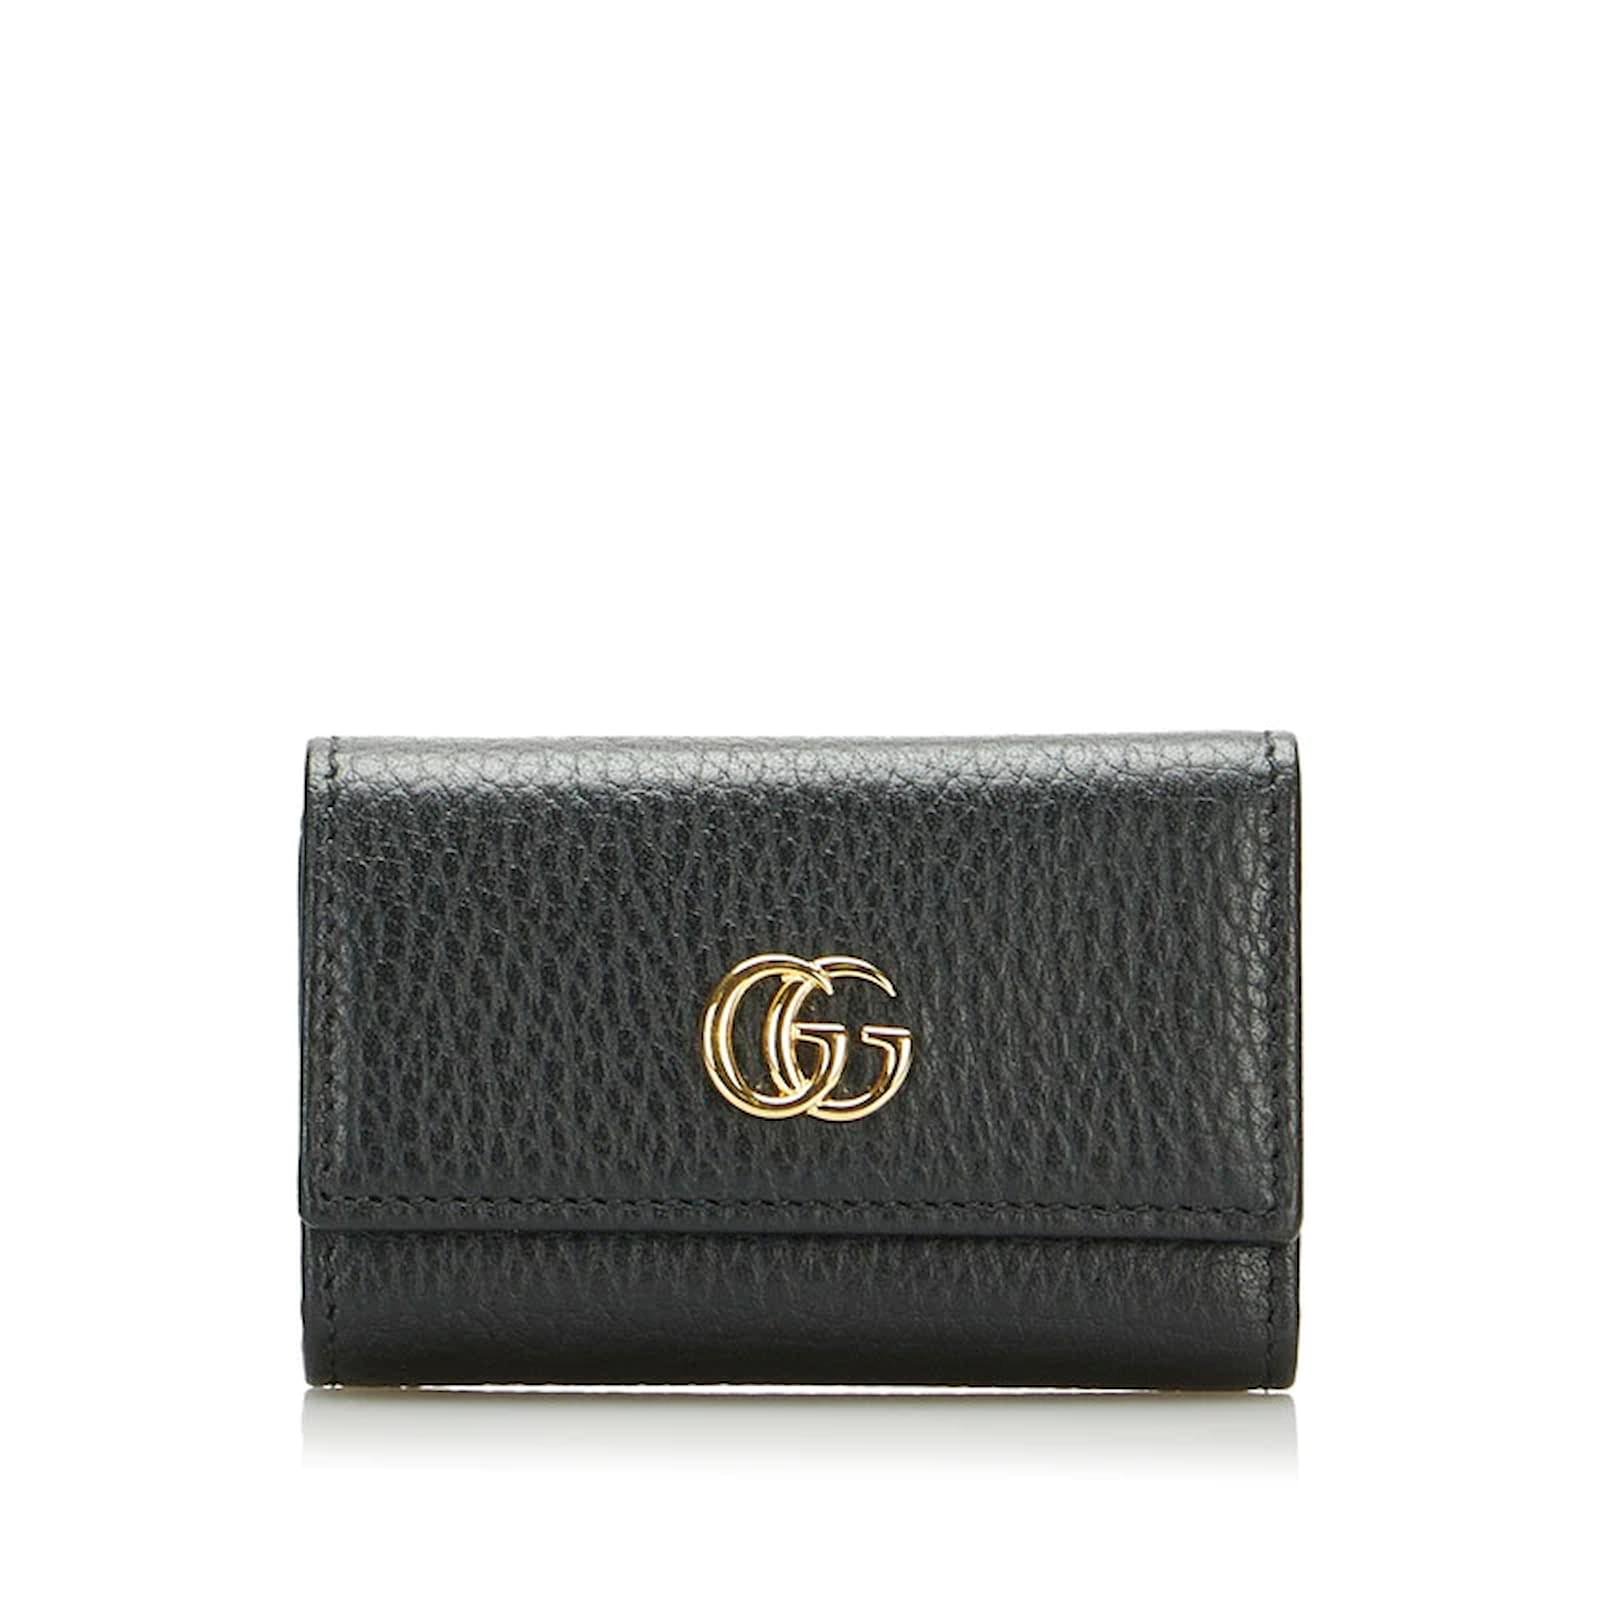 Gucci, Accessories, Gg Marmont Leather Key Case